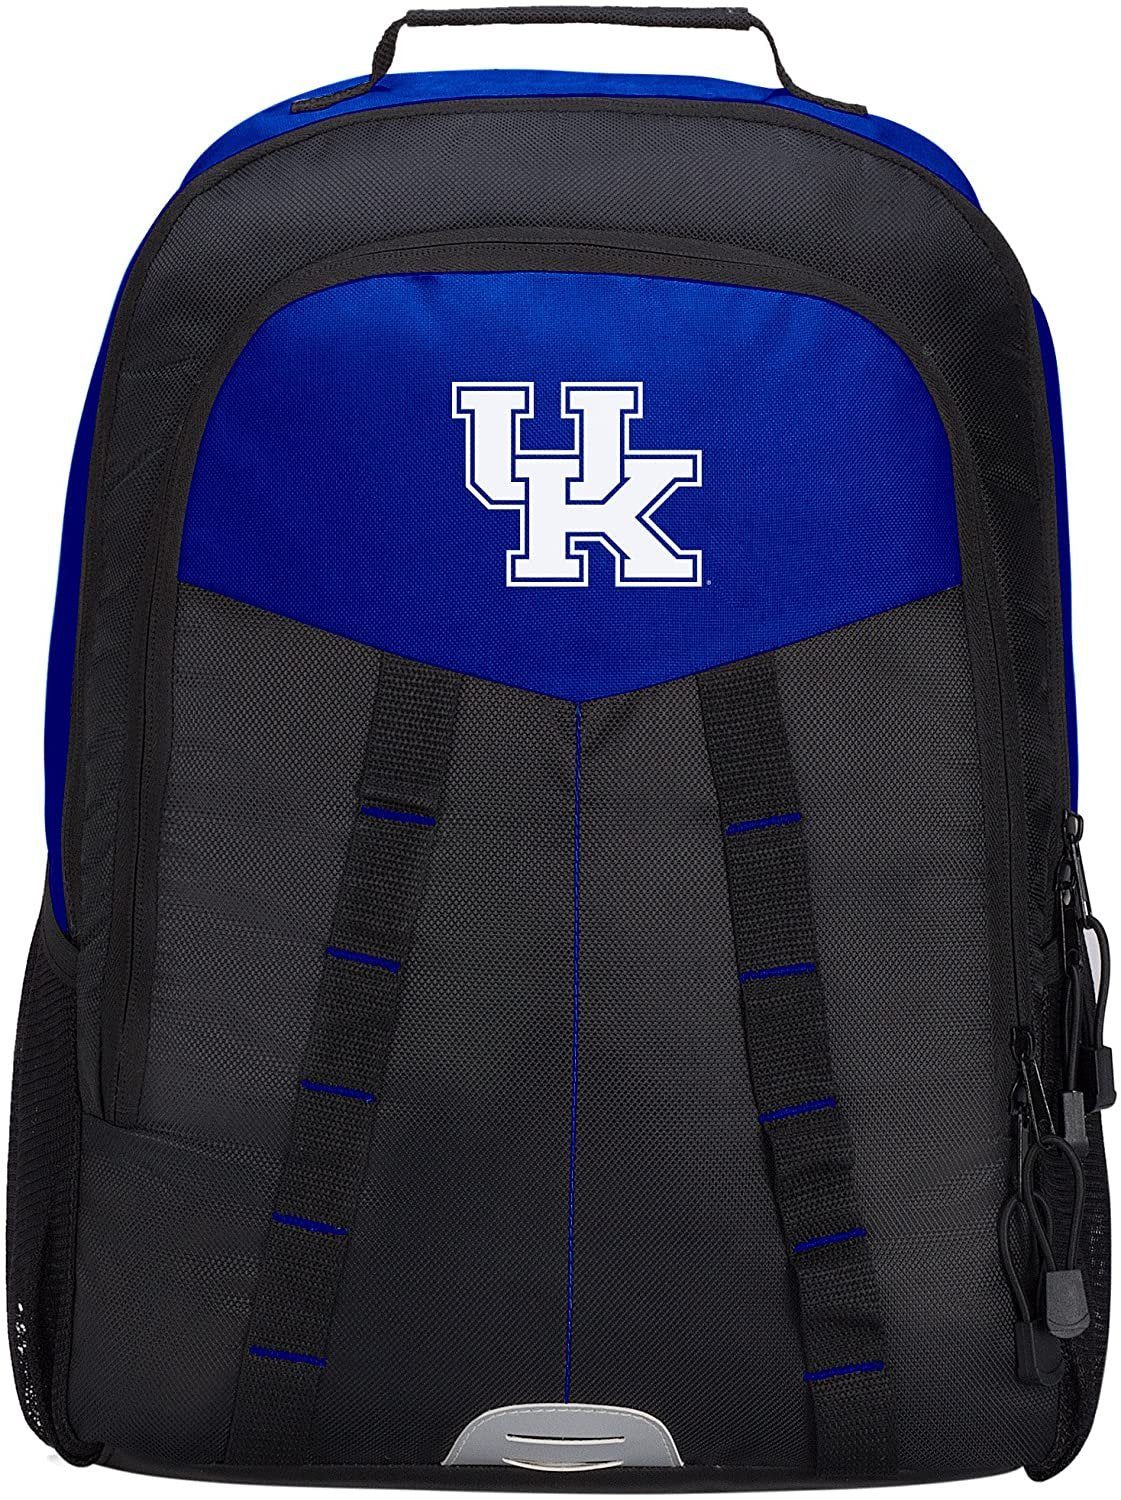 University of Kentucky Wildcats Backpack Premium Embroidered Heavy Duty Scorcher Design, 18.5x12.5x5 Inch